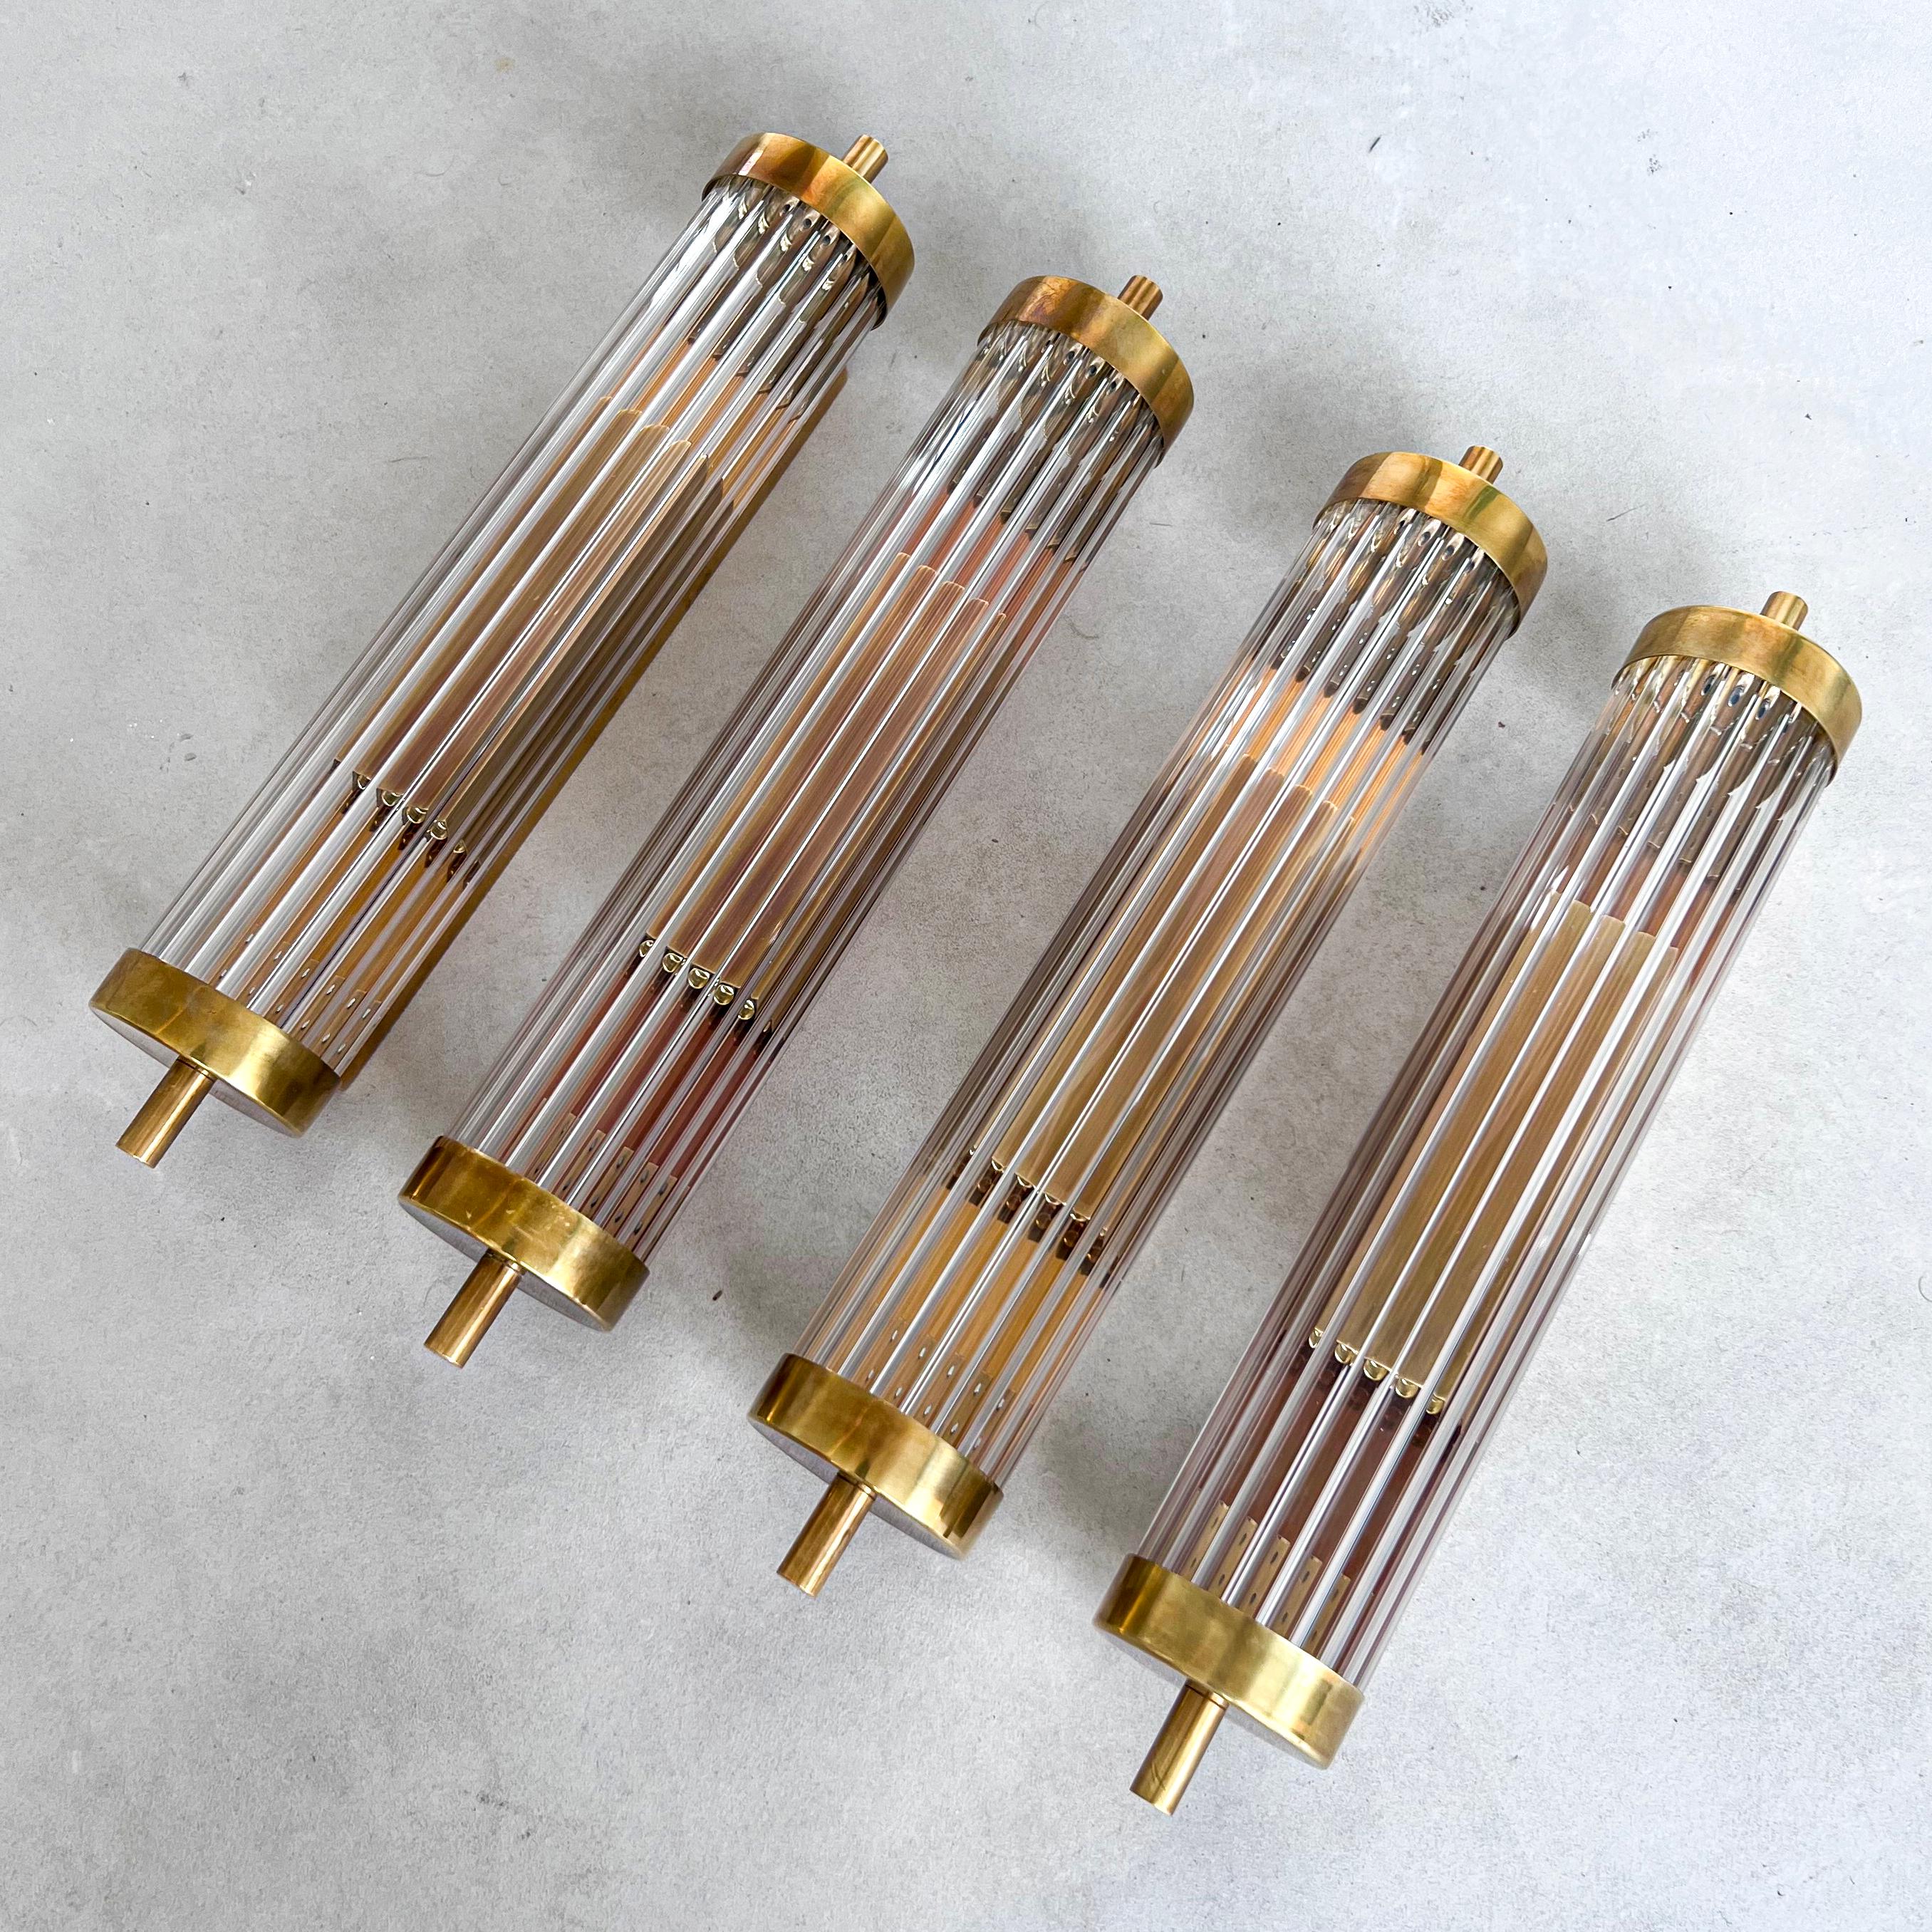 Wall lamps Applique for Vanity or Wall Sconces - Modern Mid Century Italian Lighting - Flush mount

Offered for sale is a set of four stunning contemporary wall lights, designed and hand crafted in Milano, Italy by expert artisans using brass and